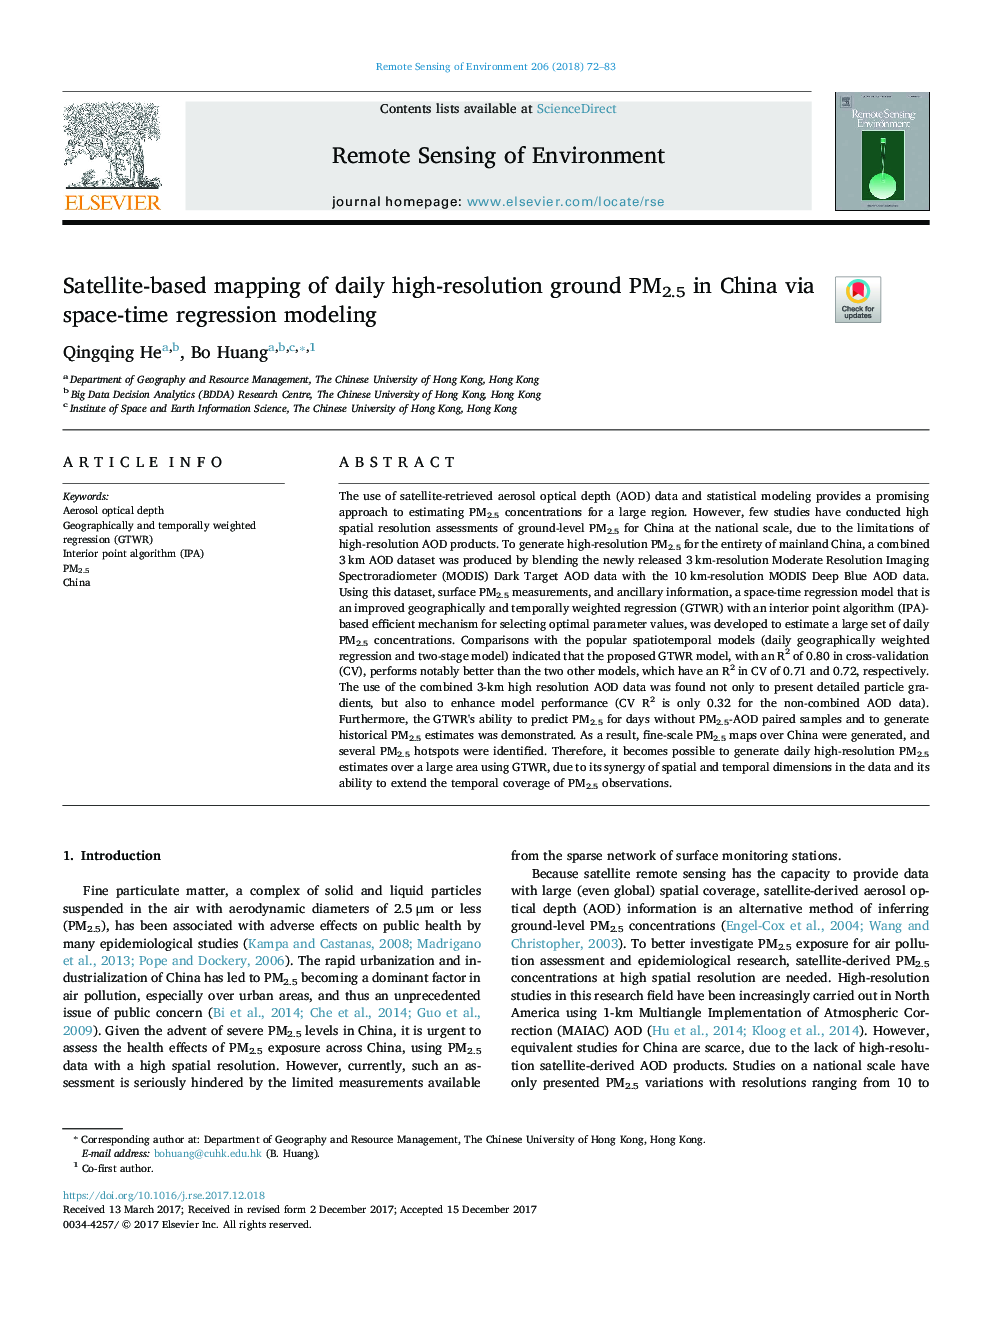 Satellite-based mapping of daily high-resolution ground PM2.5 in China via space-time regression modeling